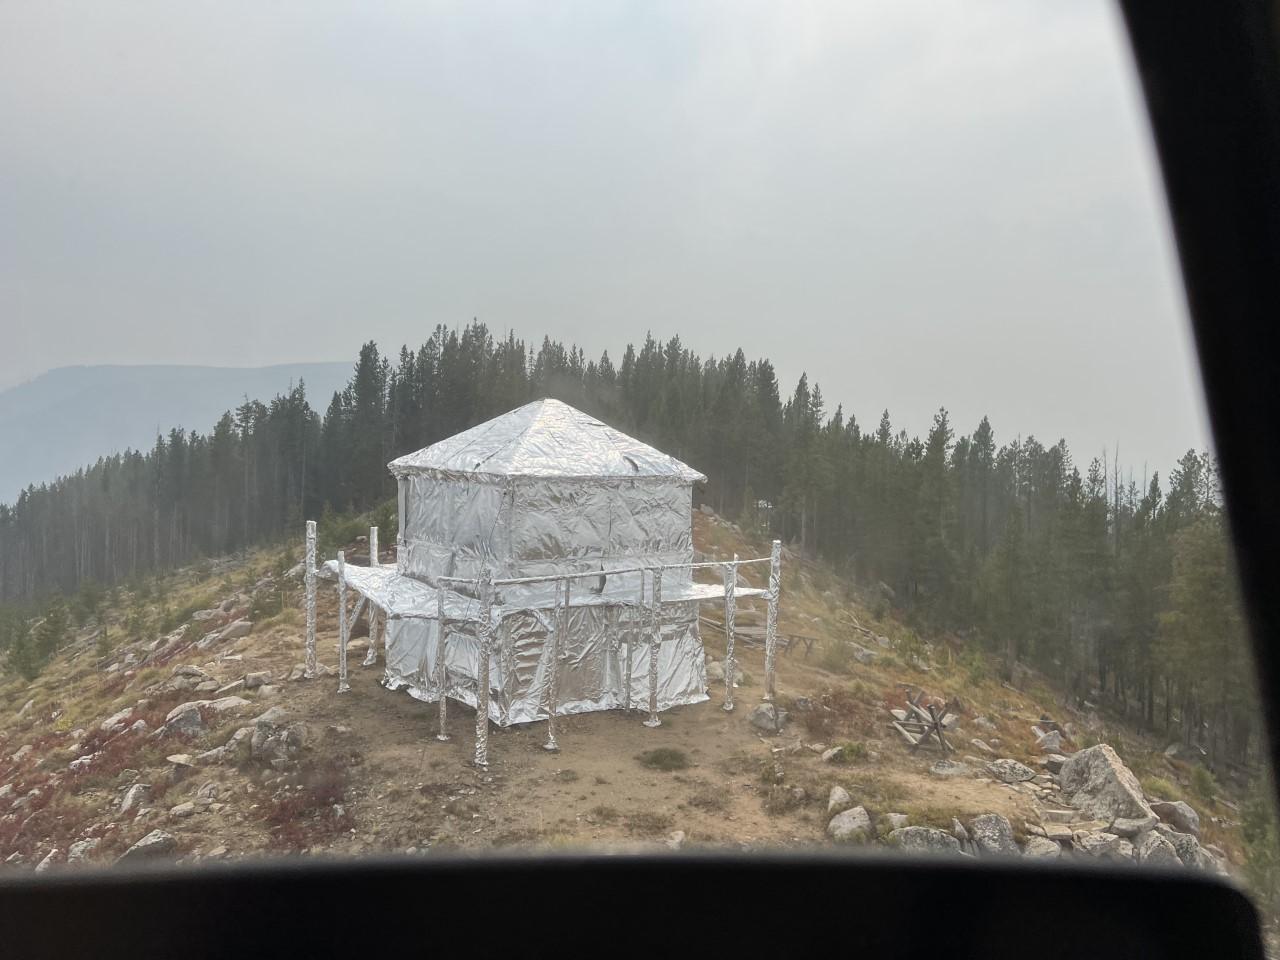 The photo is taken at the top of a mountain peak. It shows a conifer forest with a cleared area around a lookout structure that is wrapped with reflective material.